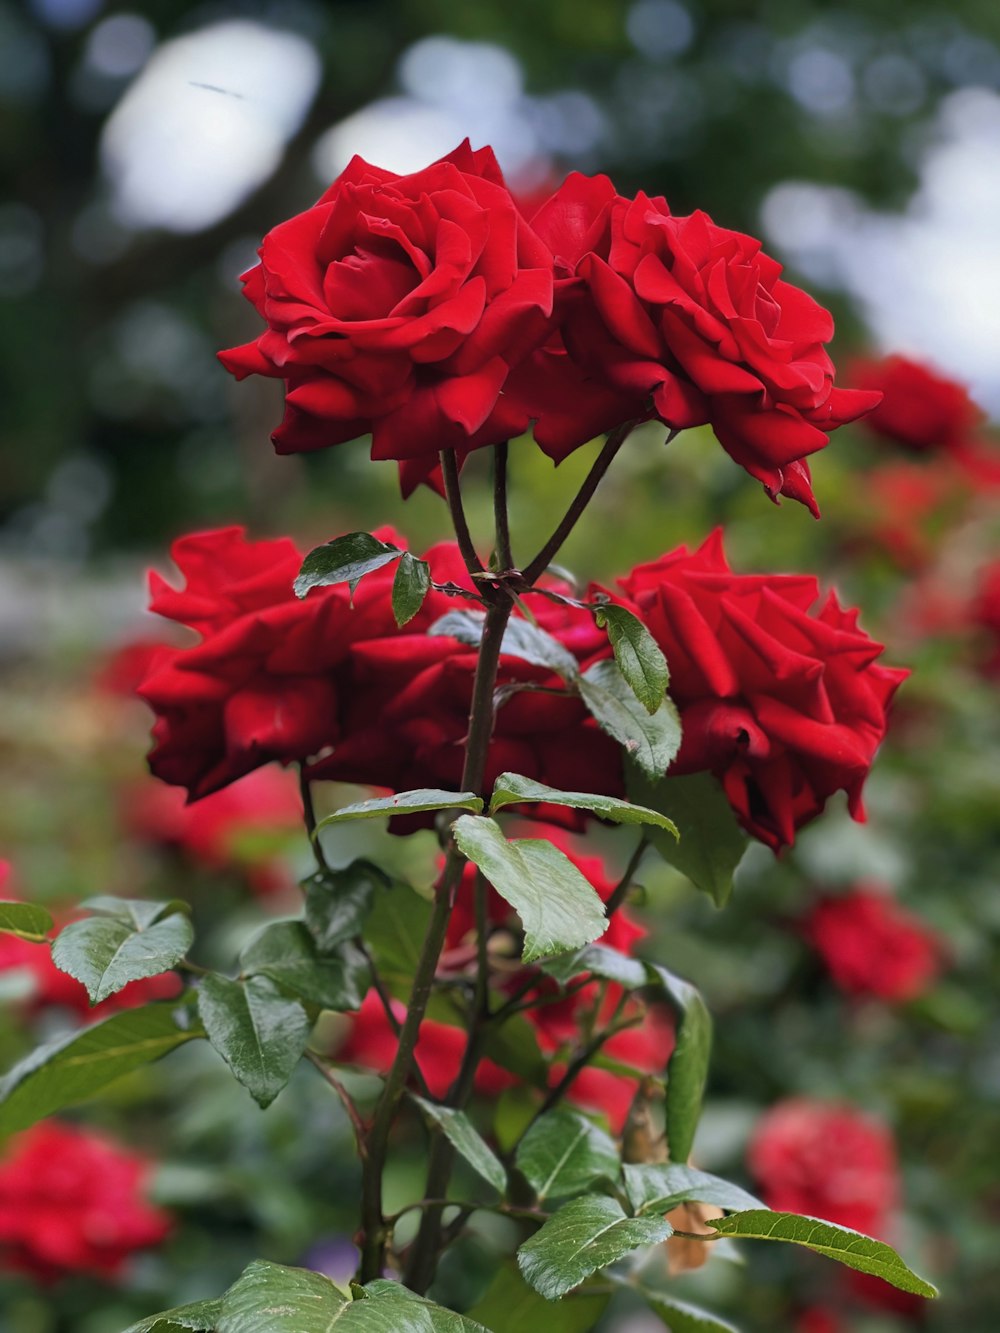 a bunch of red roses growing in a garden